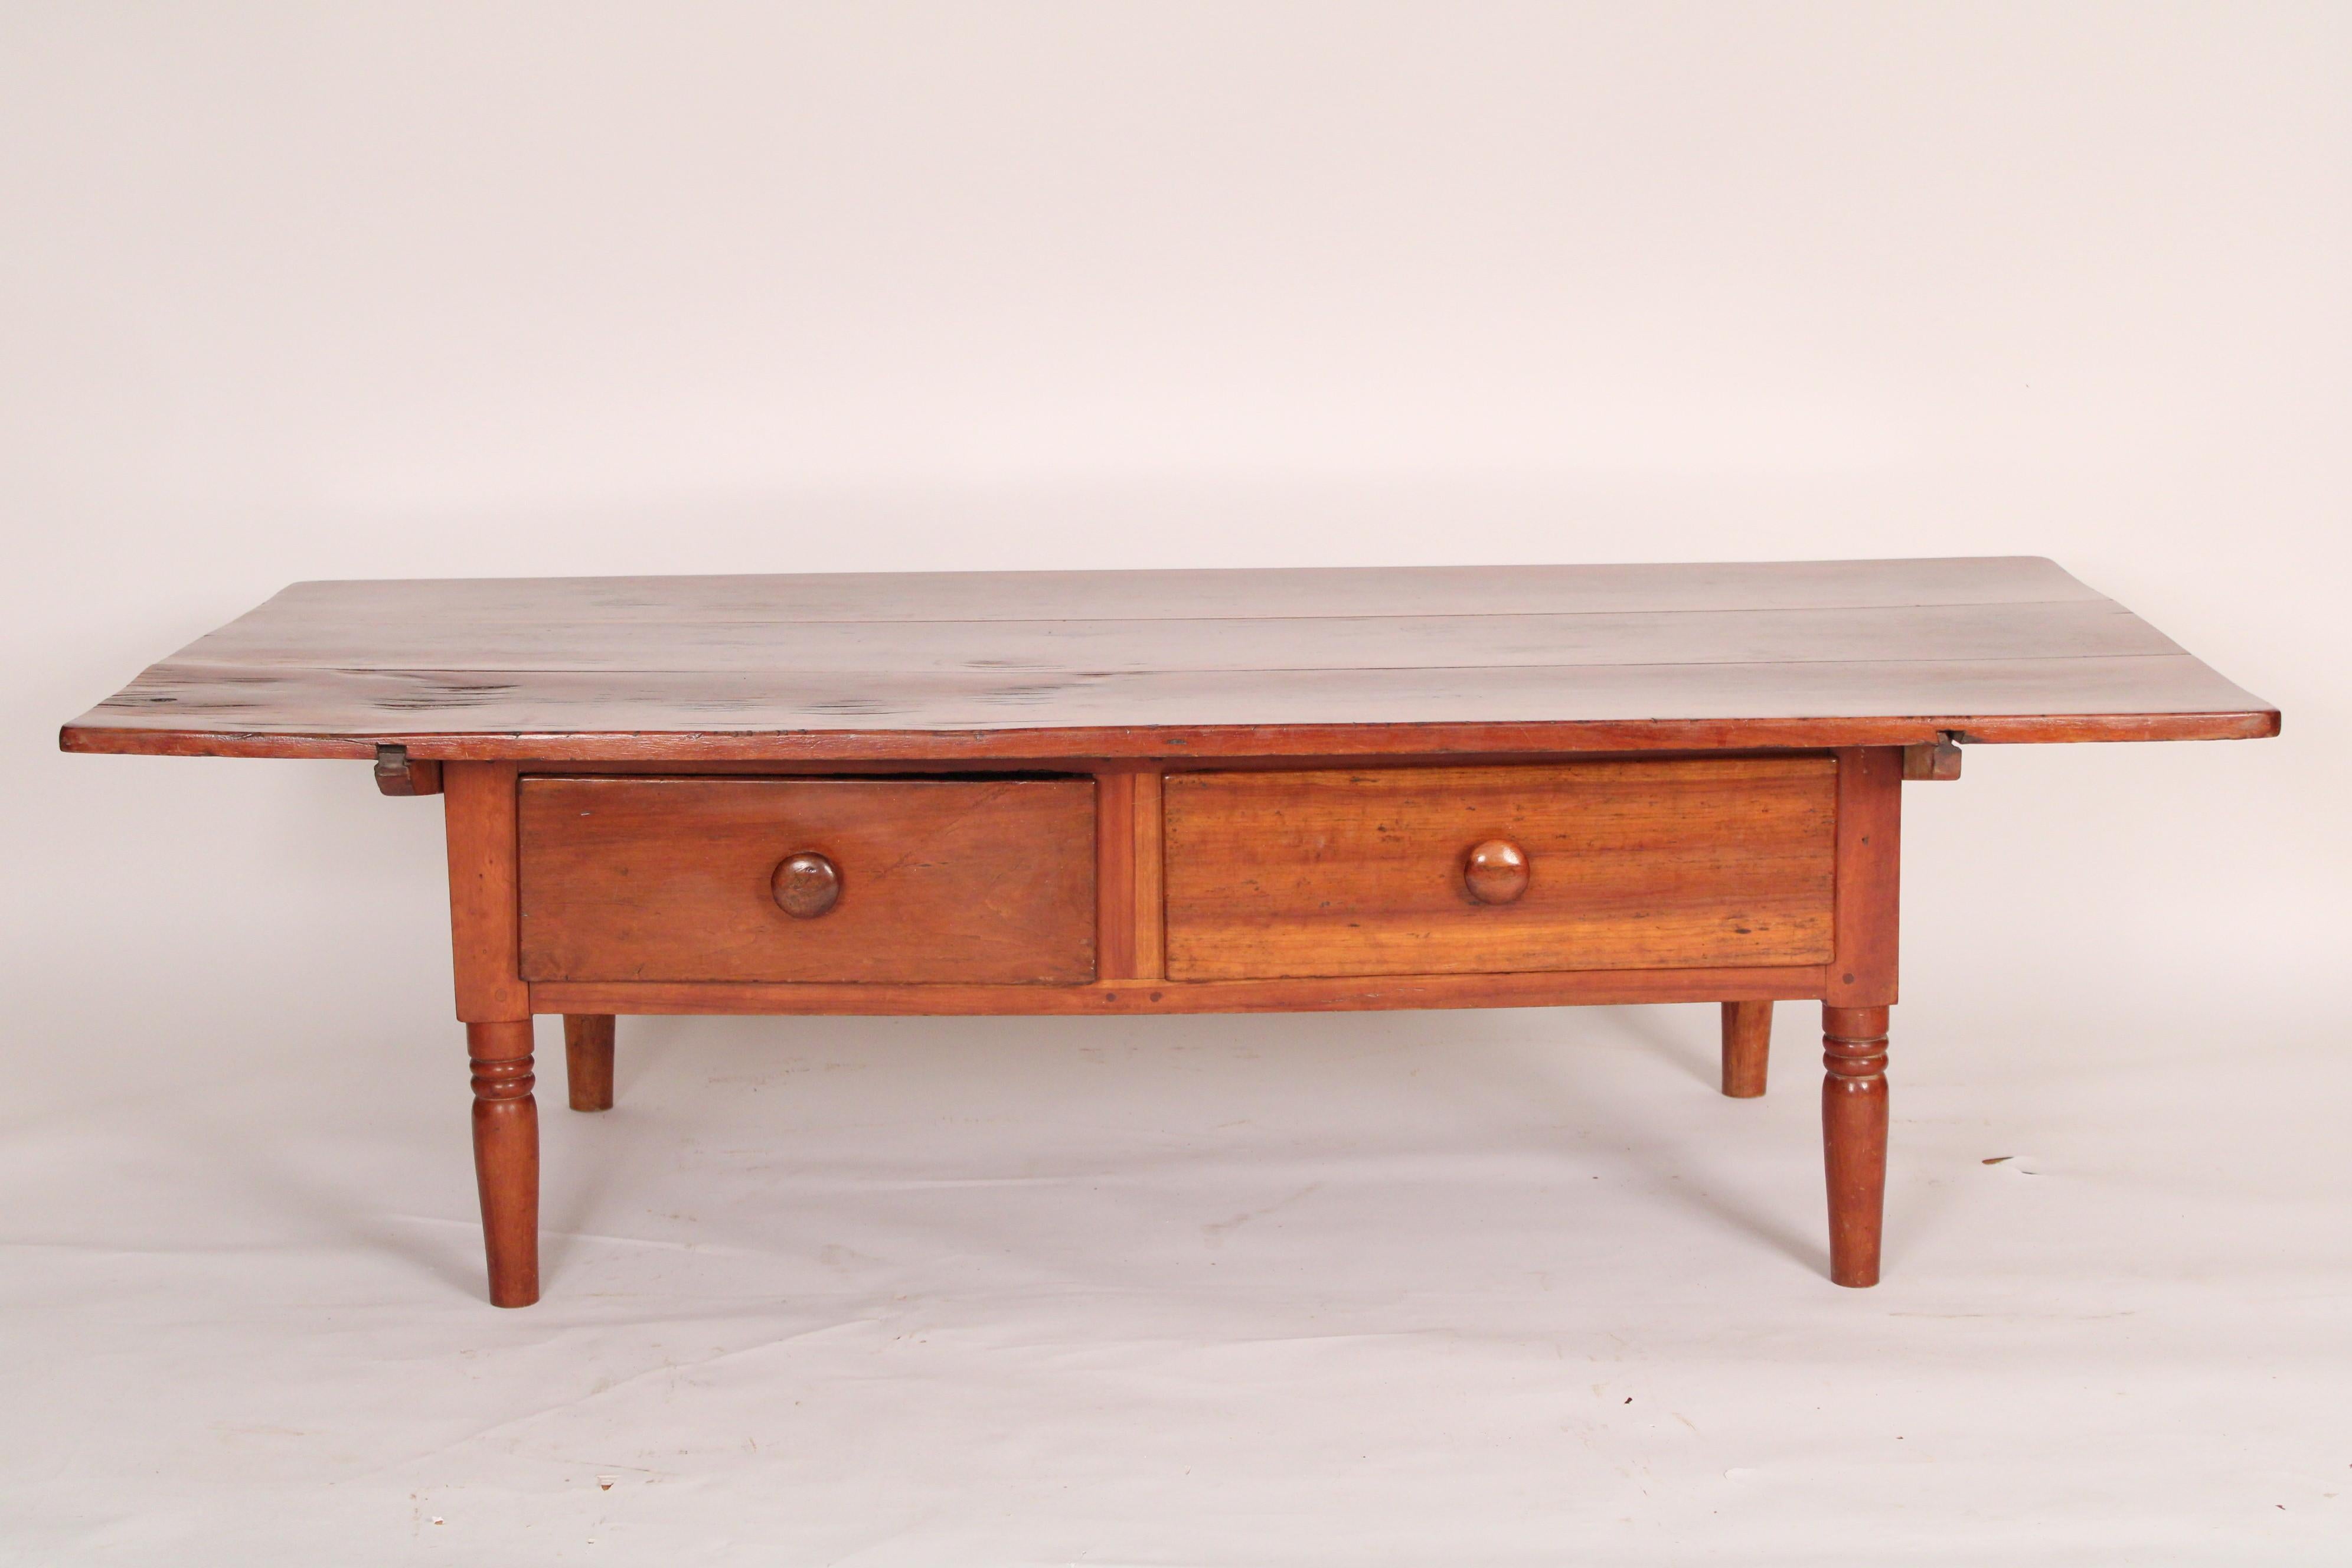 Rustic red pine coffee table, circa 1910. With a rectangular top, two hand dove tailed frieze
drawers, resting on turned tapered legs. Originally this was a kitchen or small dining table that has been reduced in height to be used as a coffee table.